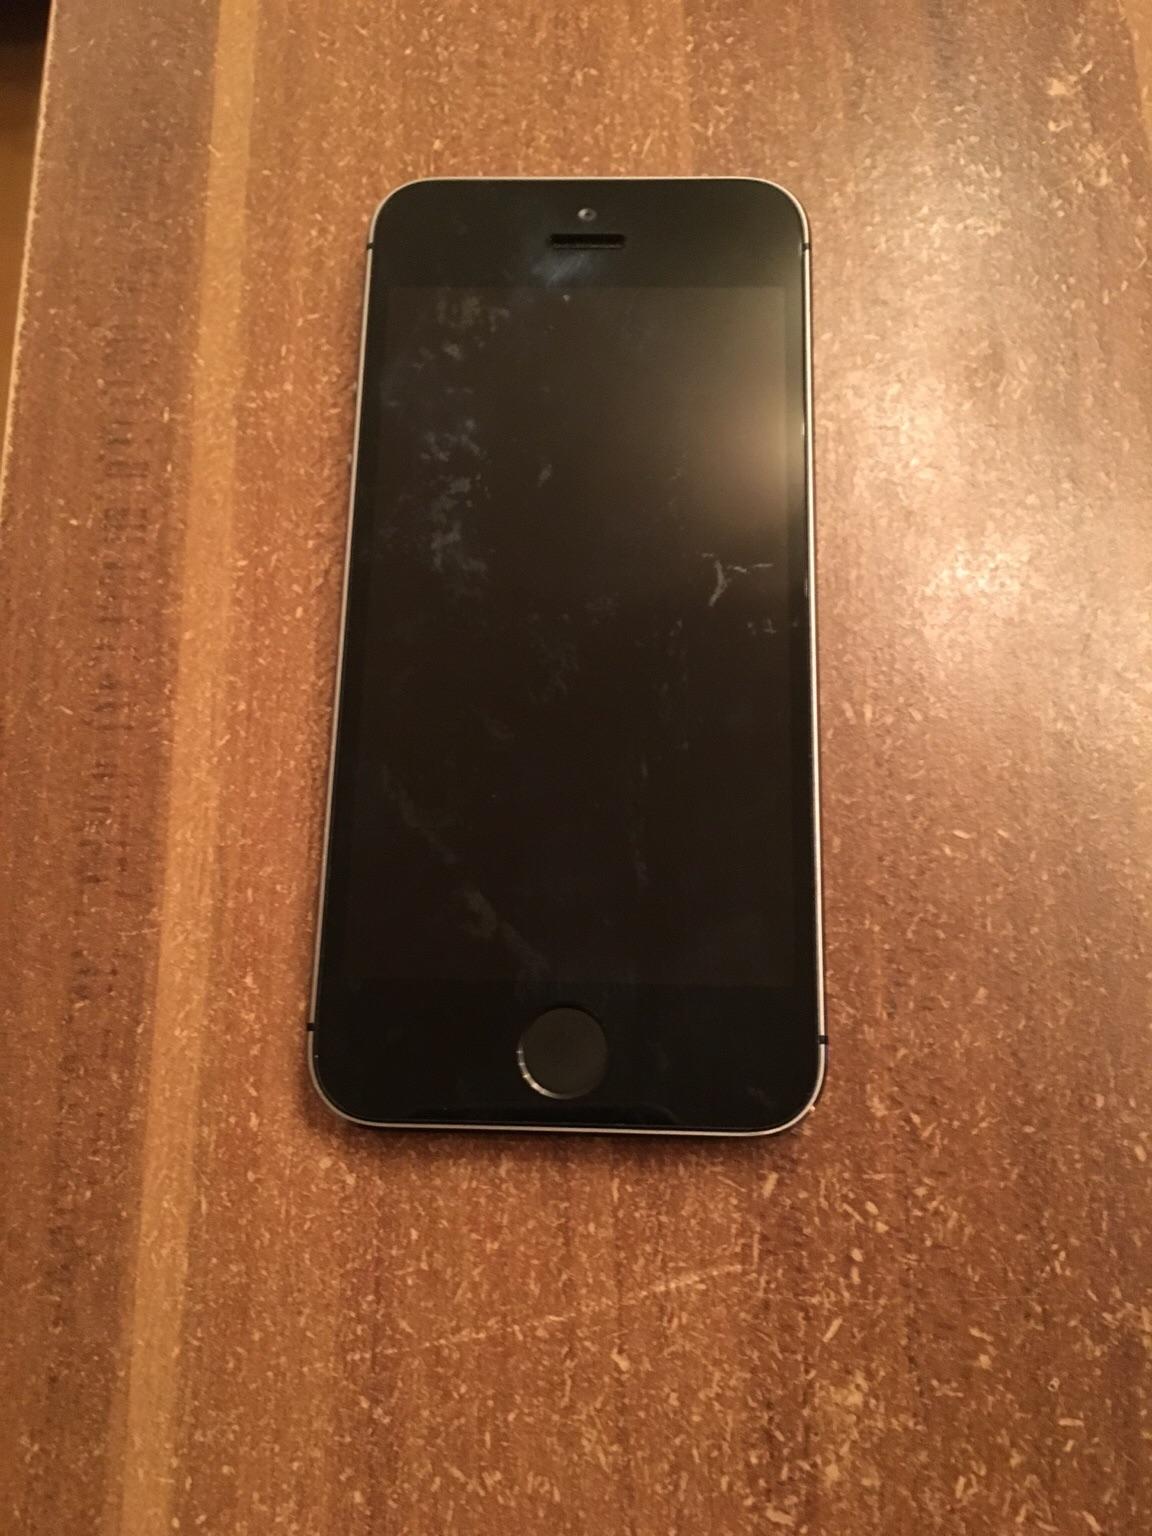 iPhone 5S, space grey, 16GB in 1030 Wien for €189.00 for sale | Shpock